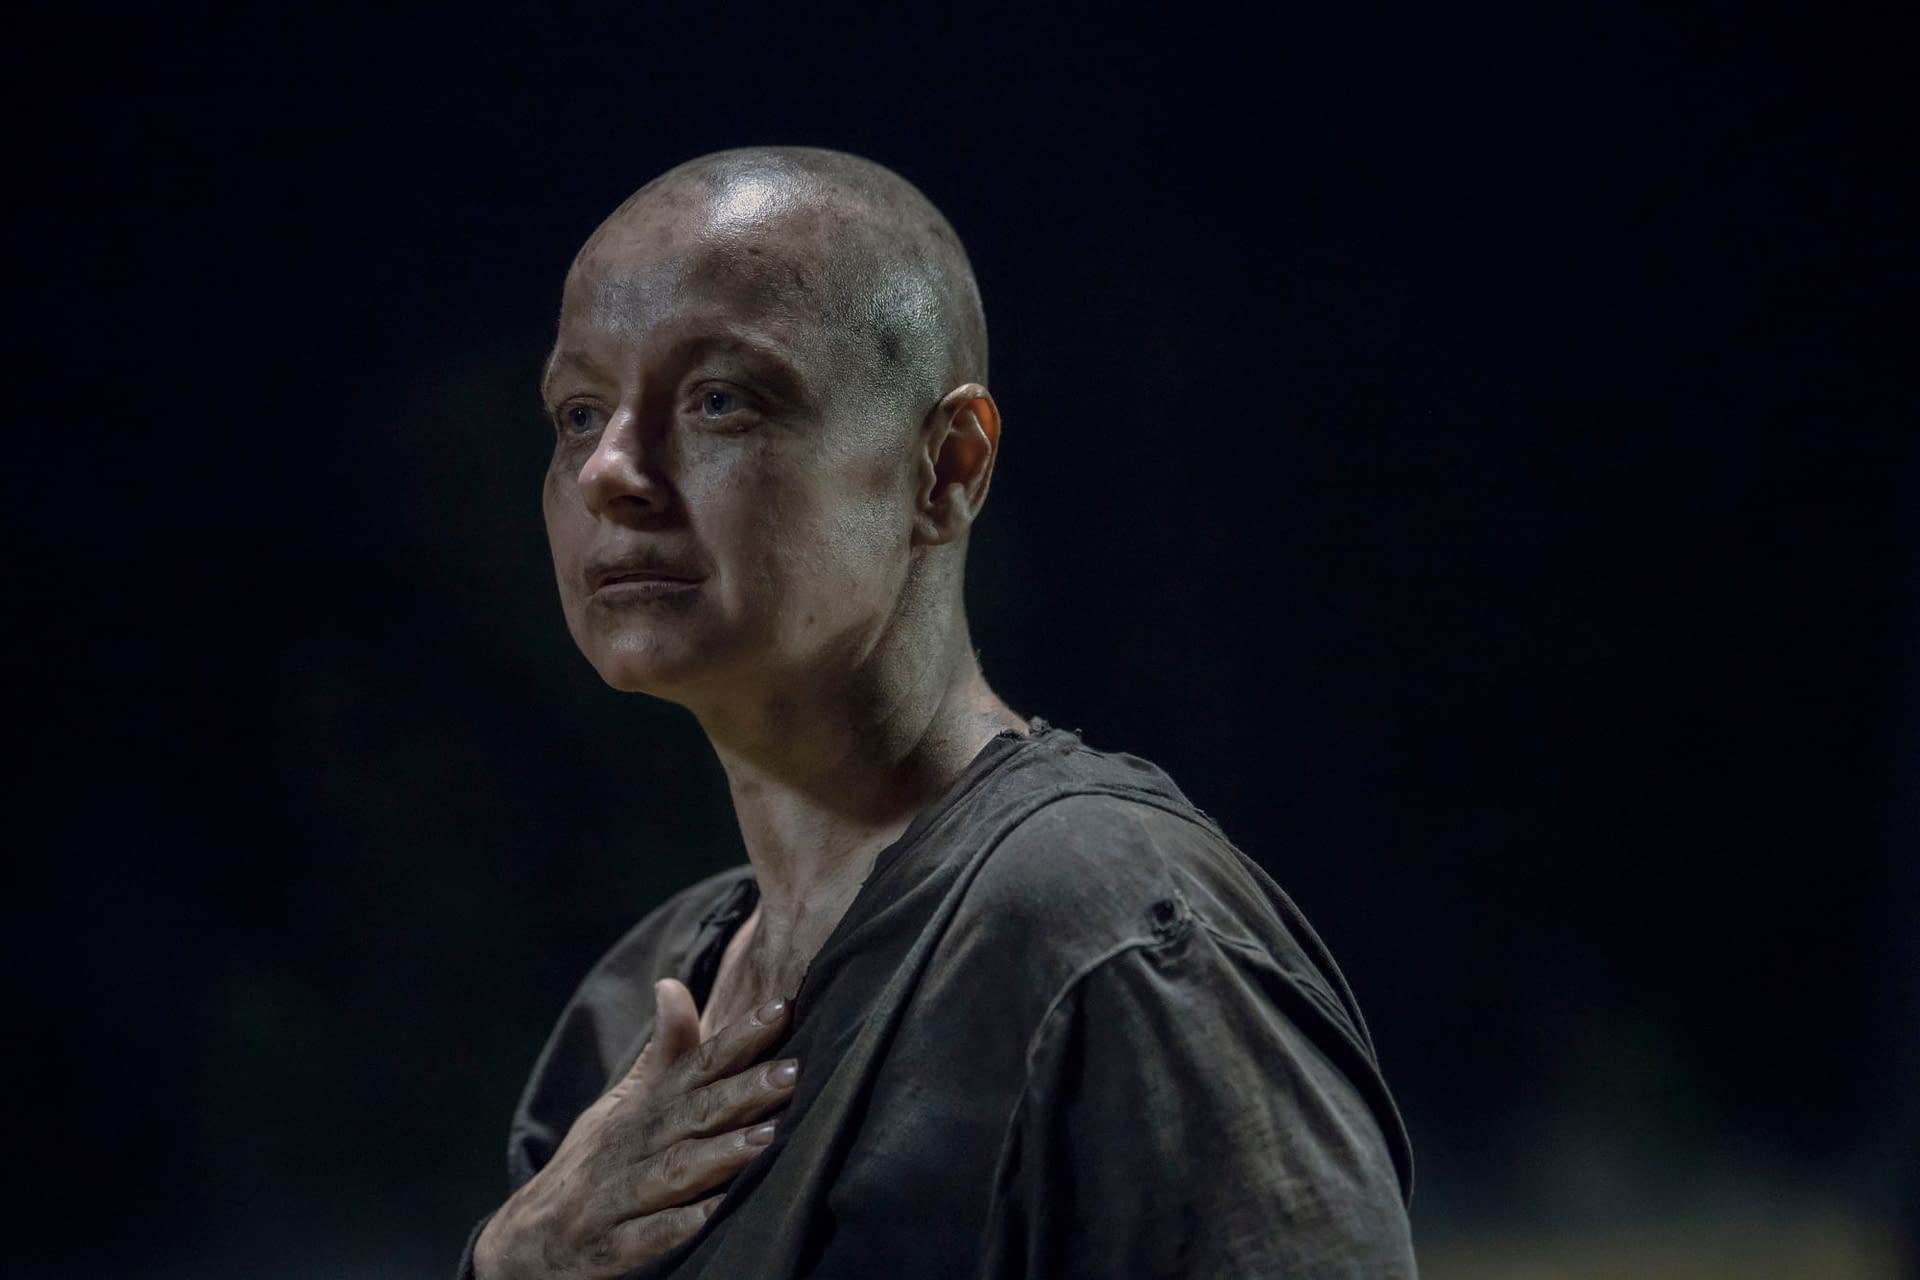 "The Walking Dead" Season 10 "The World Before": The Drumbeat of War Grows Louder [PREVIEW IMAGES]